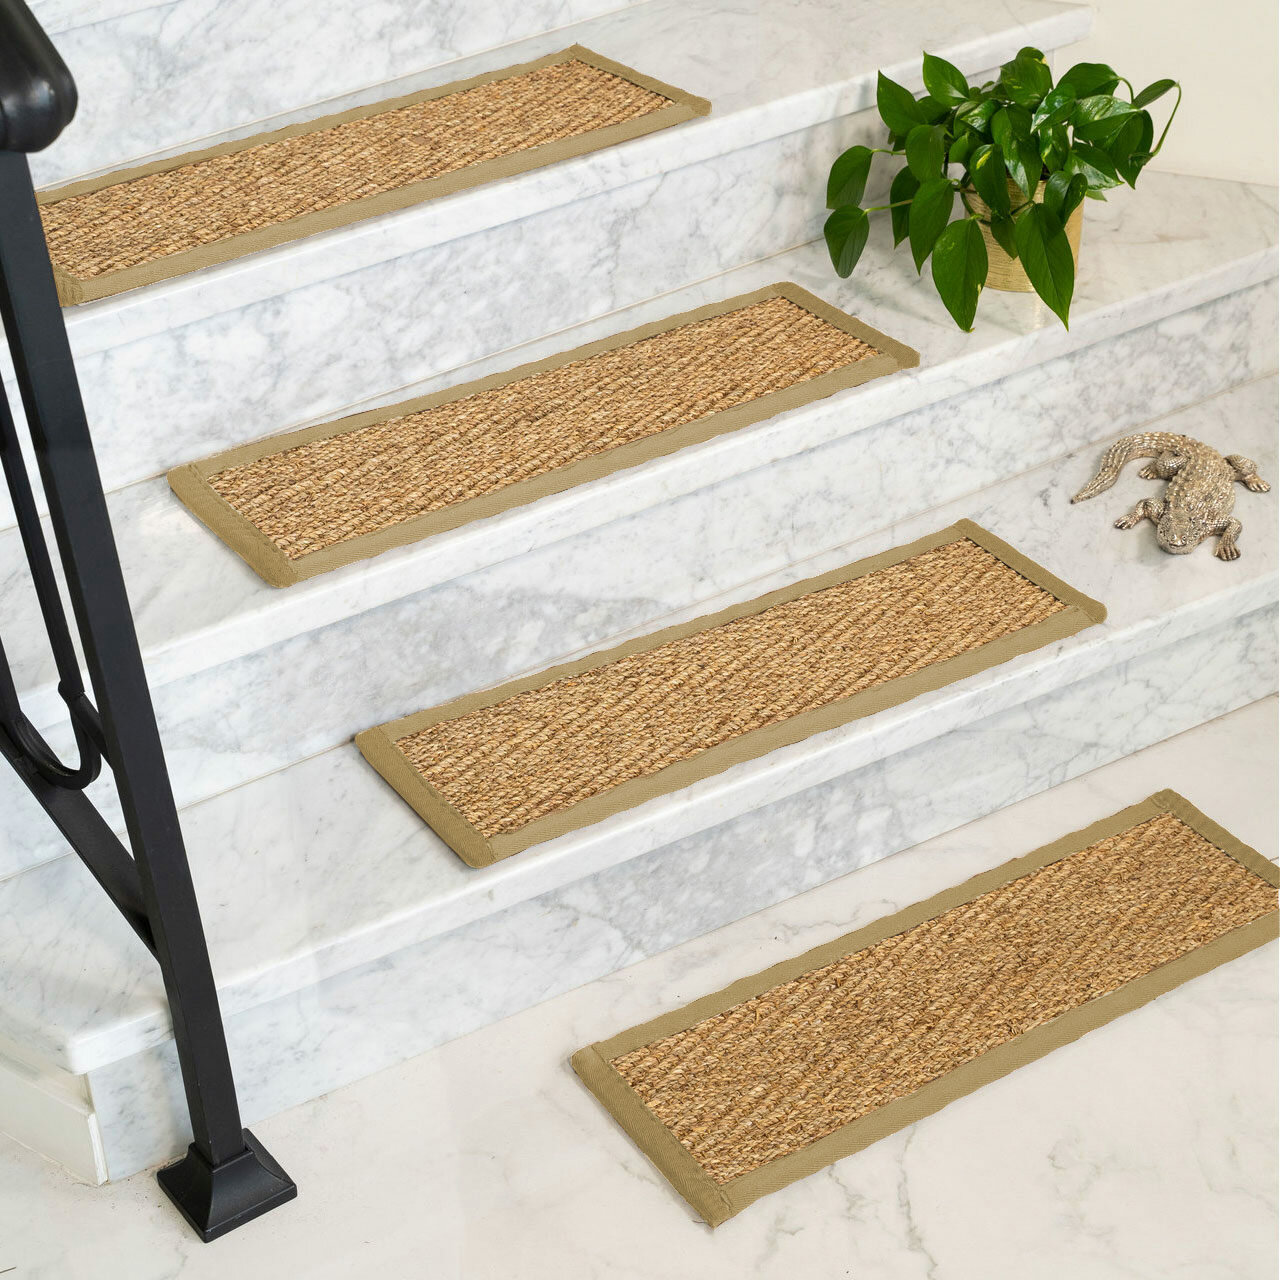 carpet stair treads at home depot